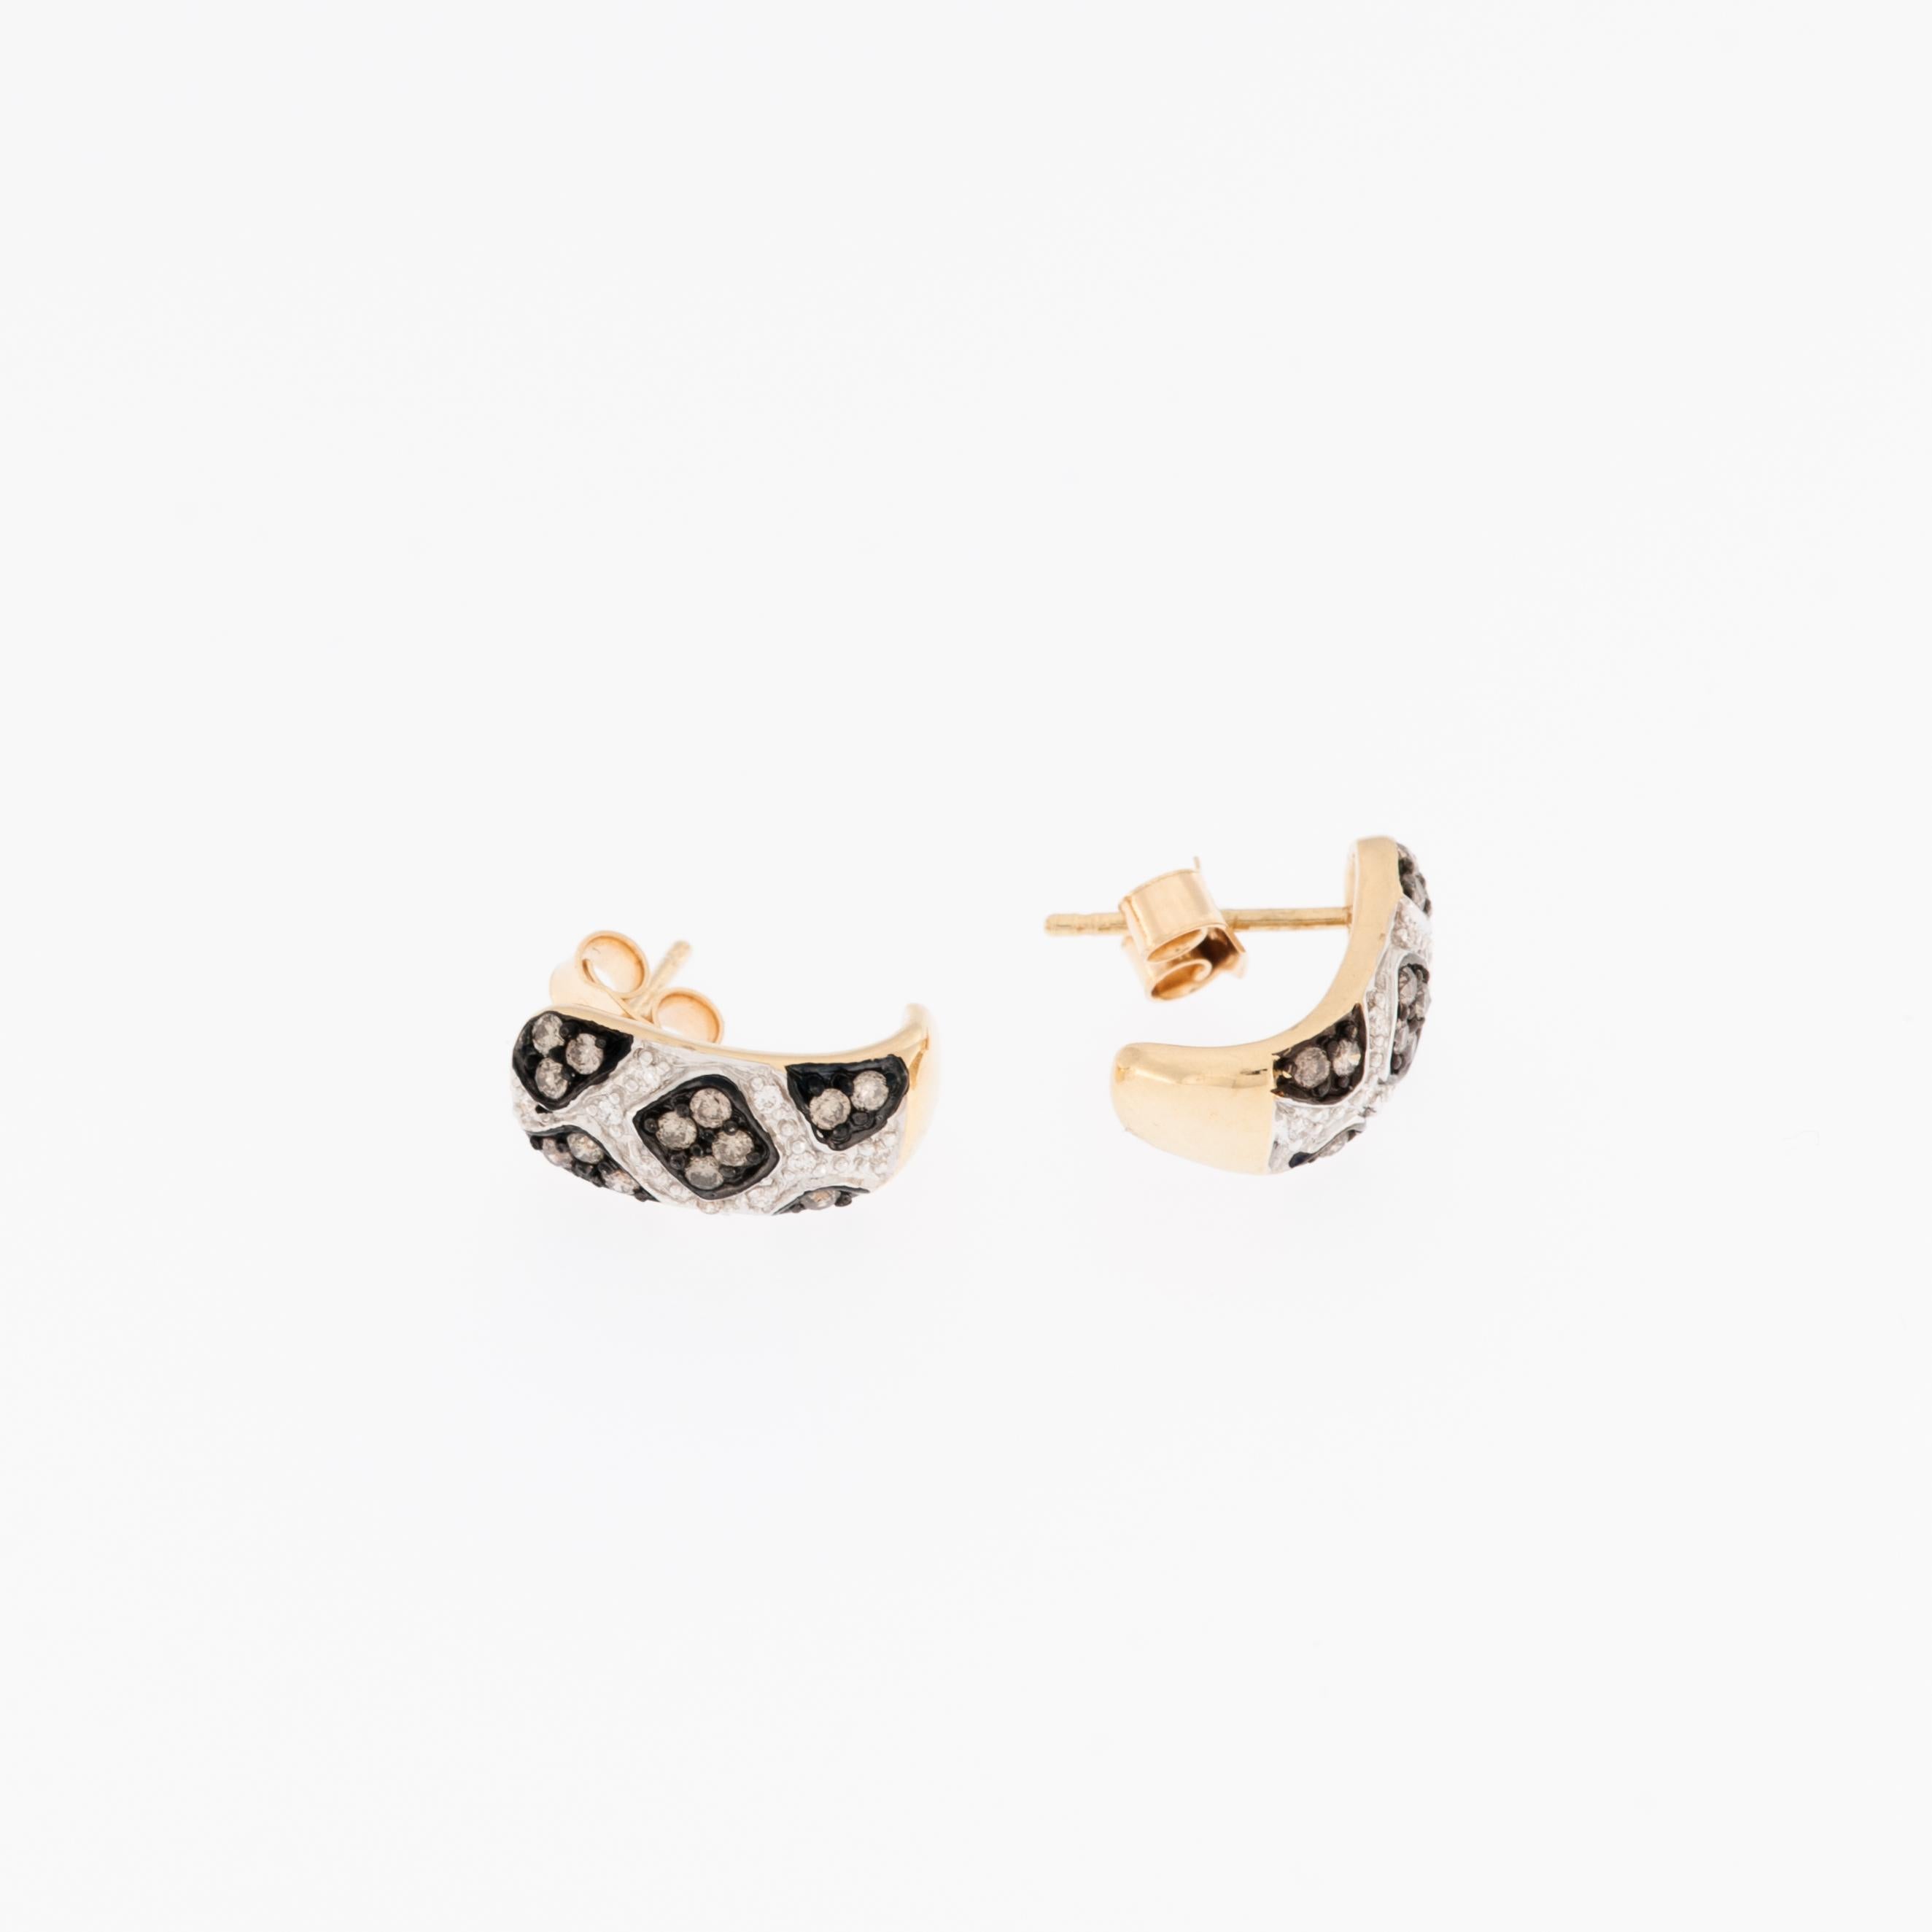 Leopard Design Earrings in 18kt Yellow Gold with Diamonds and Enamel are a beautiful and luxurious piece of jewelry. 

These earrings are crafted from 18kt yellow gold, which is known for its durability and timeless appeal. 

The earrings feature a